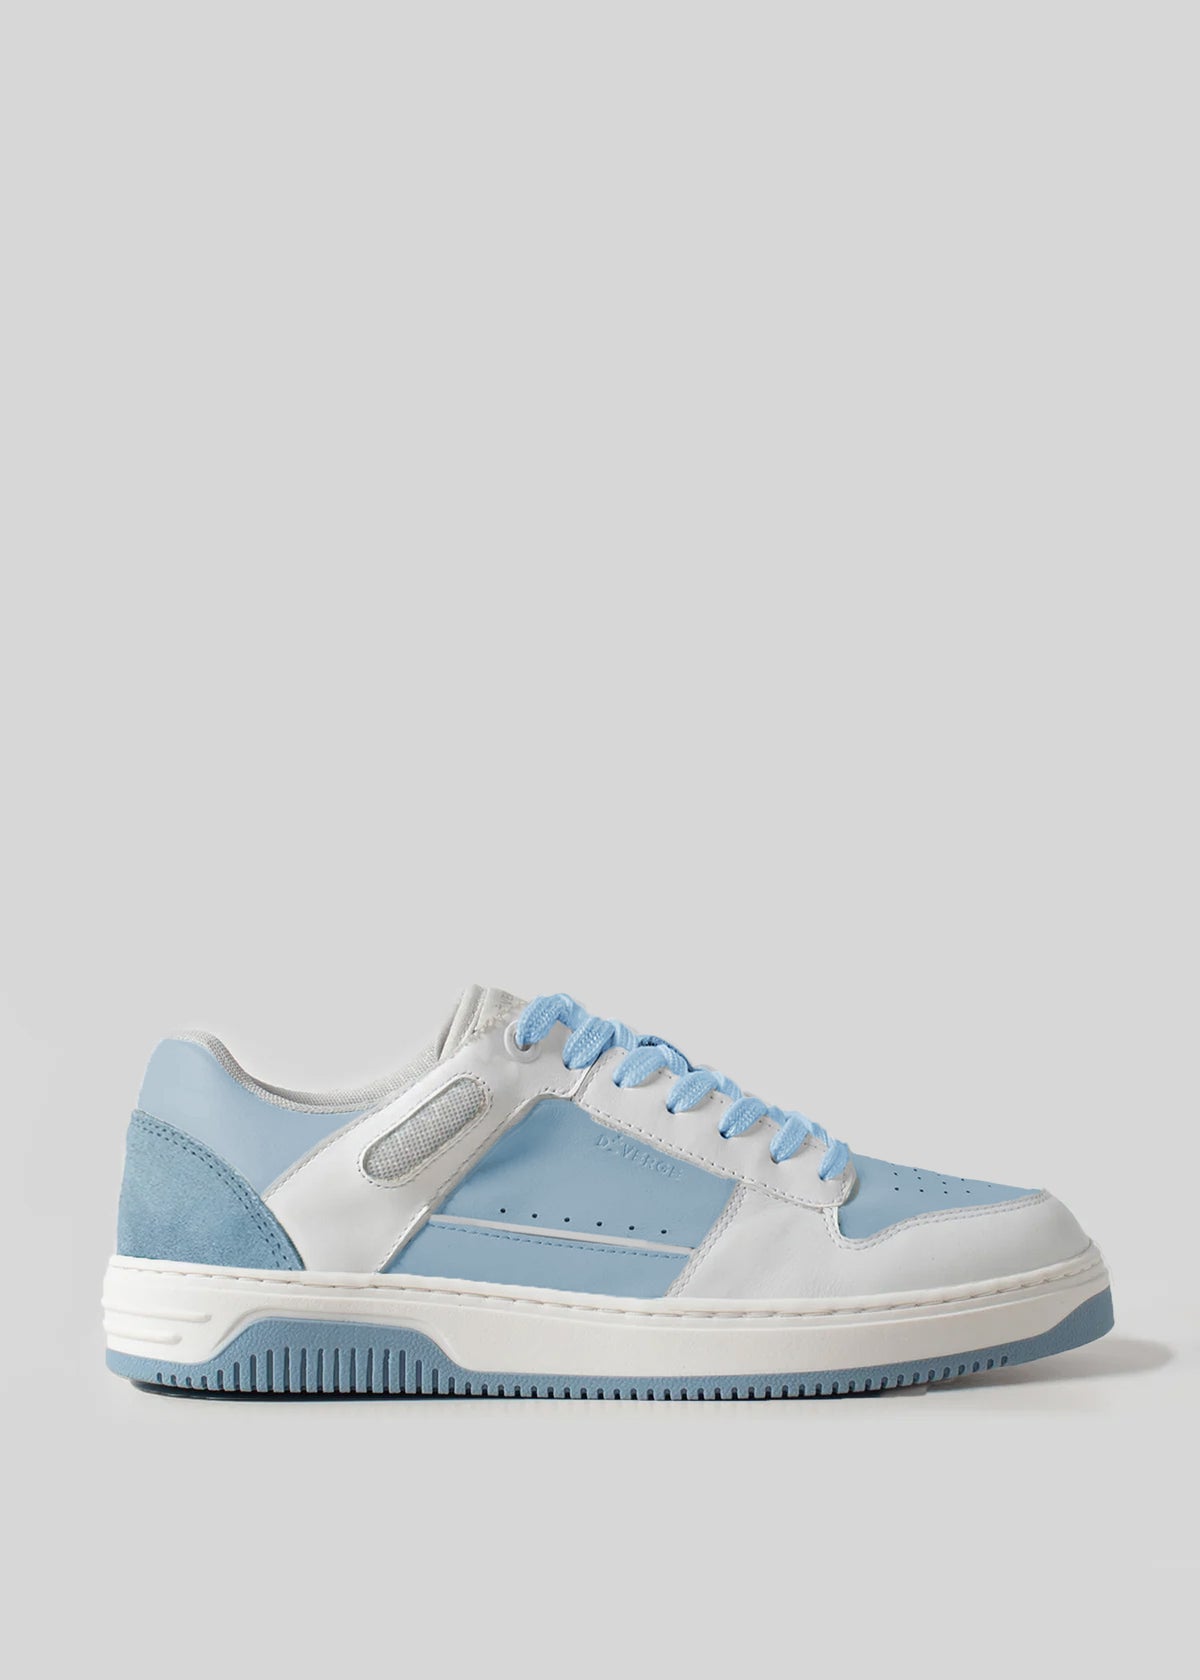 The M0008 by Pinto is a low-top retro-future sneaker with a white and light blue color scheme, featuring a white sole, blue laces, and a mix of premium Italian leathers and suede materials. Handcrafted in Portugal for unparalleled quality.